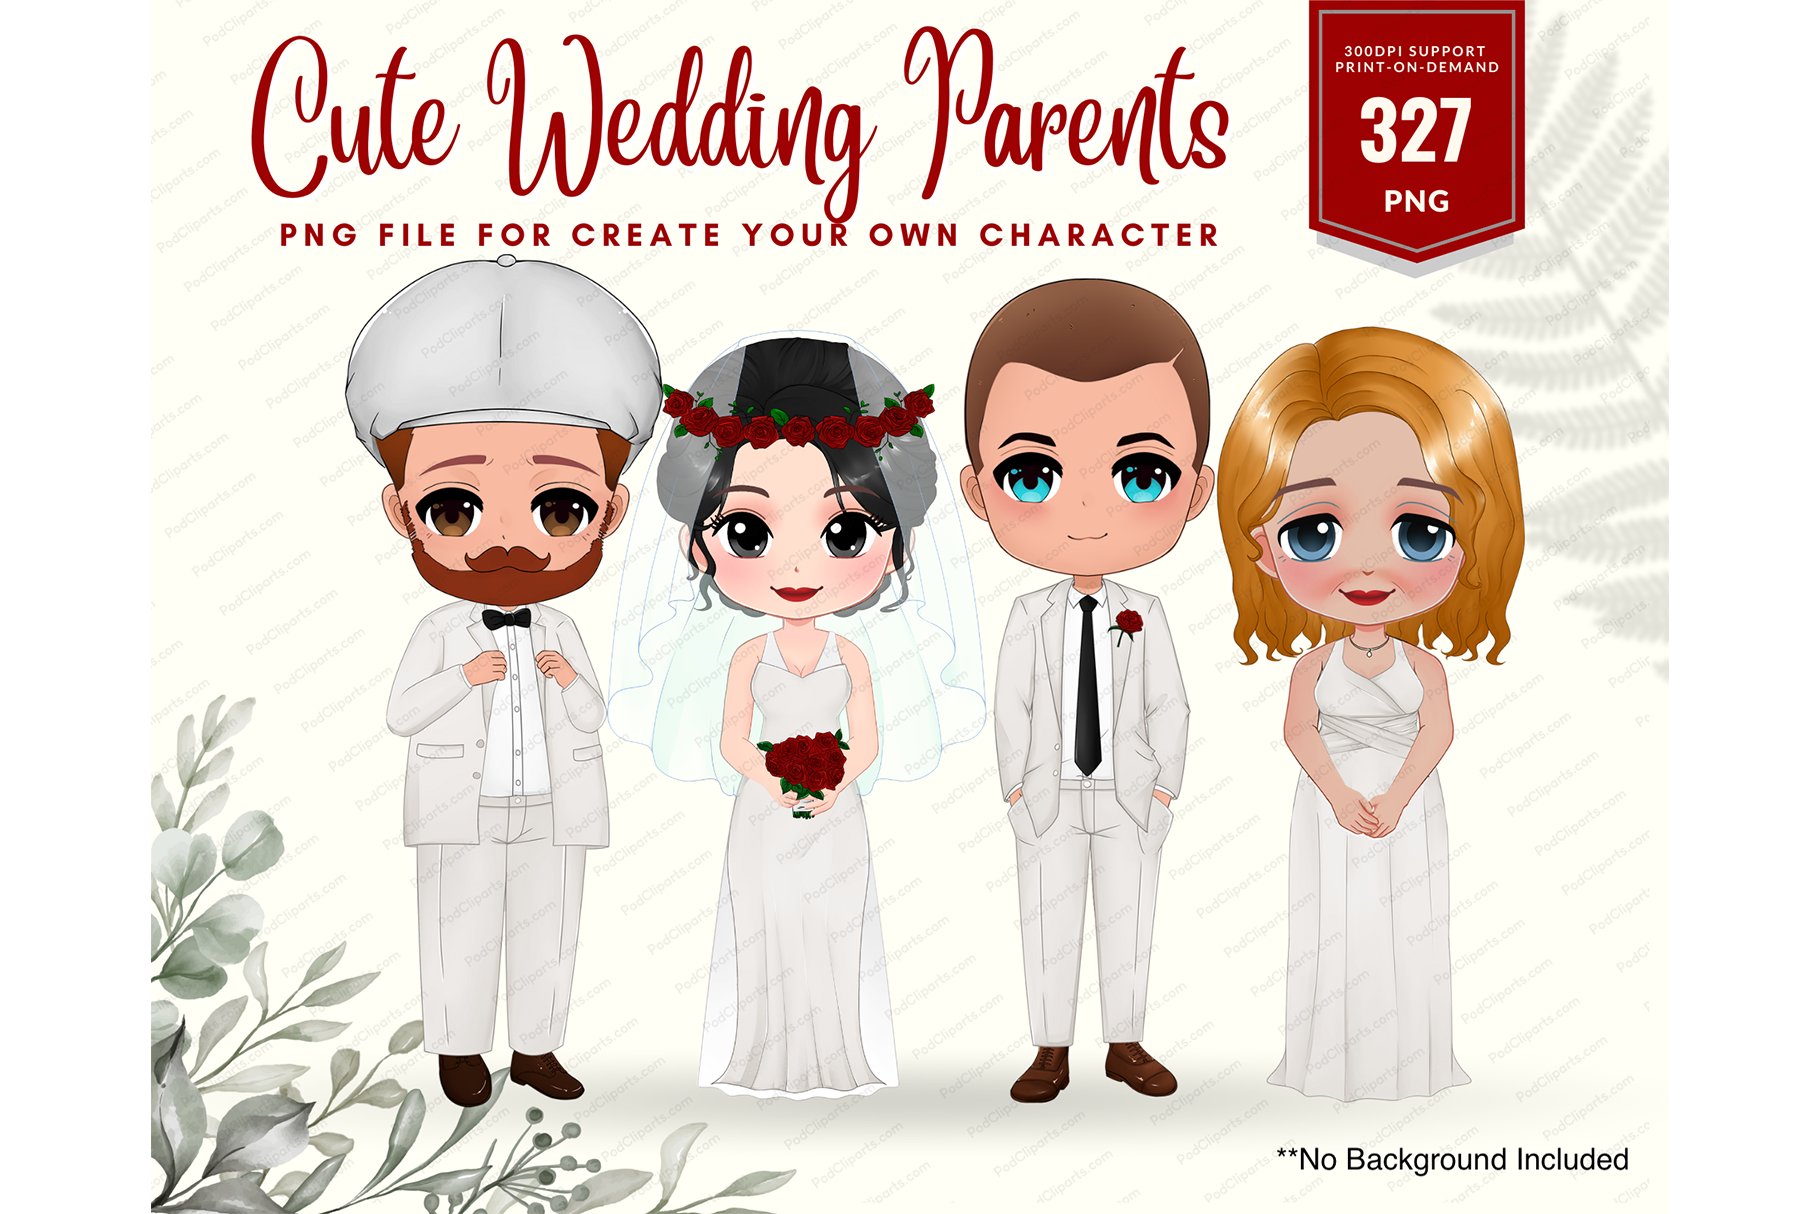 Wedding Bride & Groom Clipart PNG cover image.